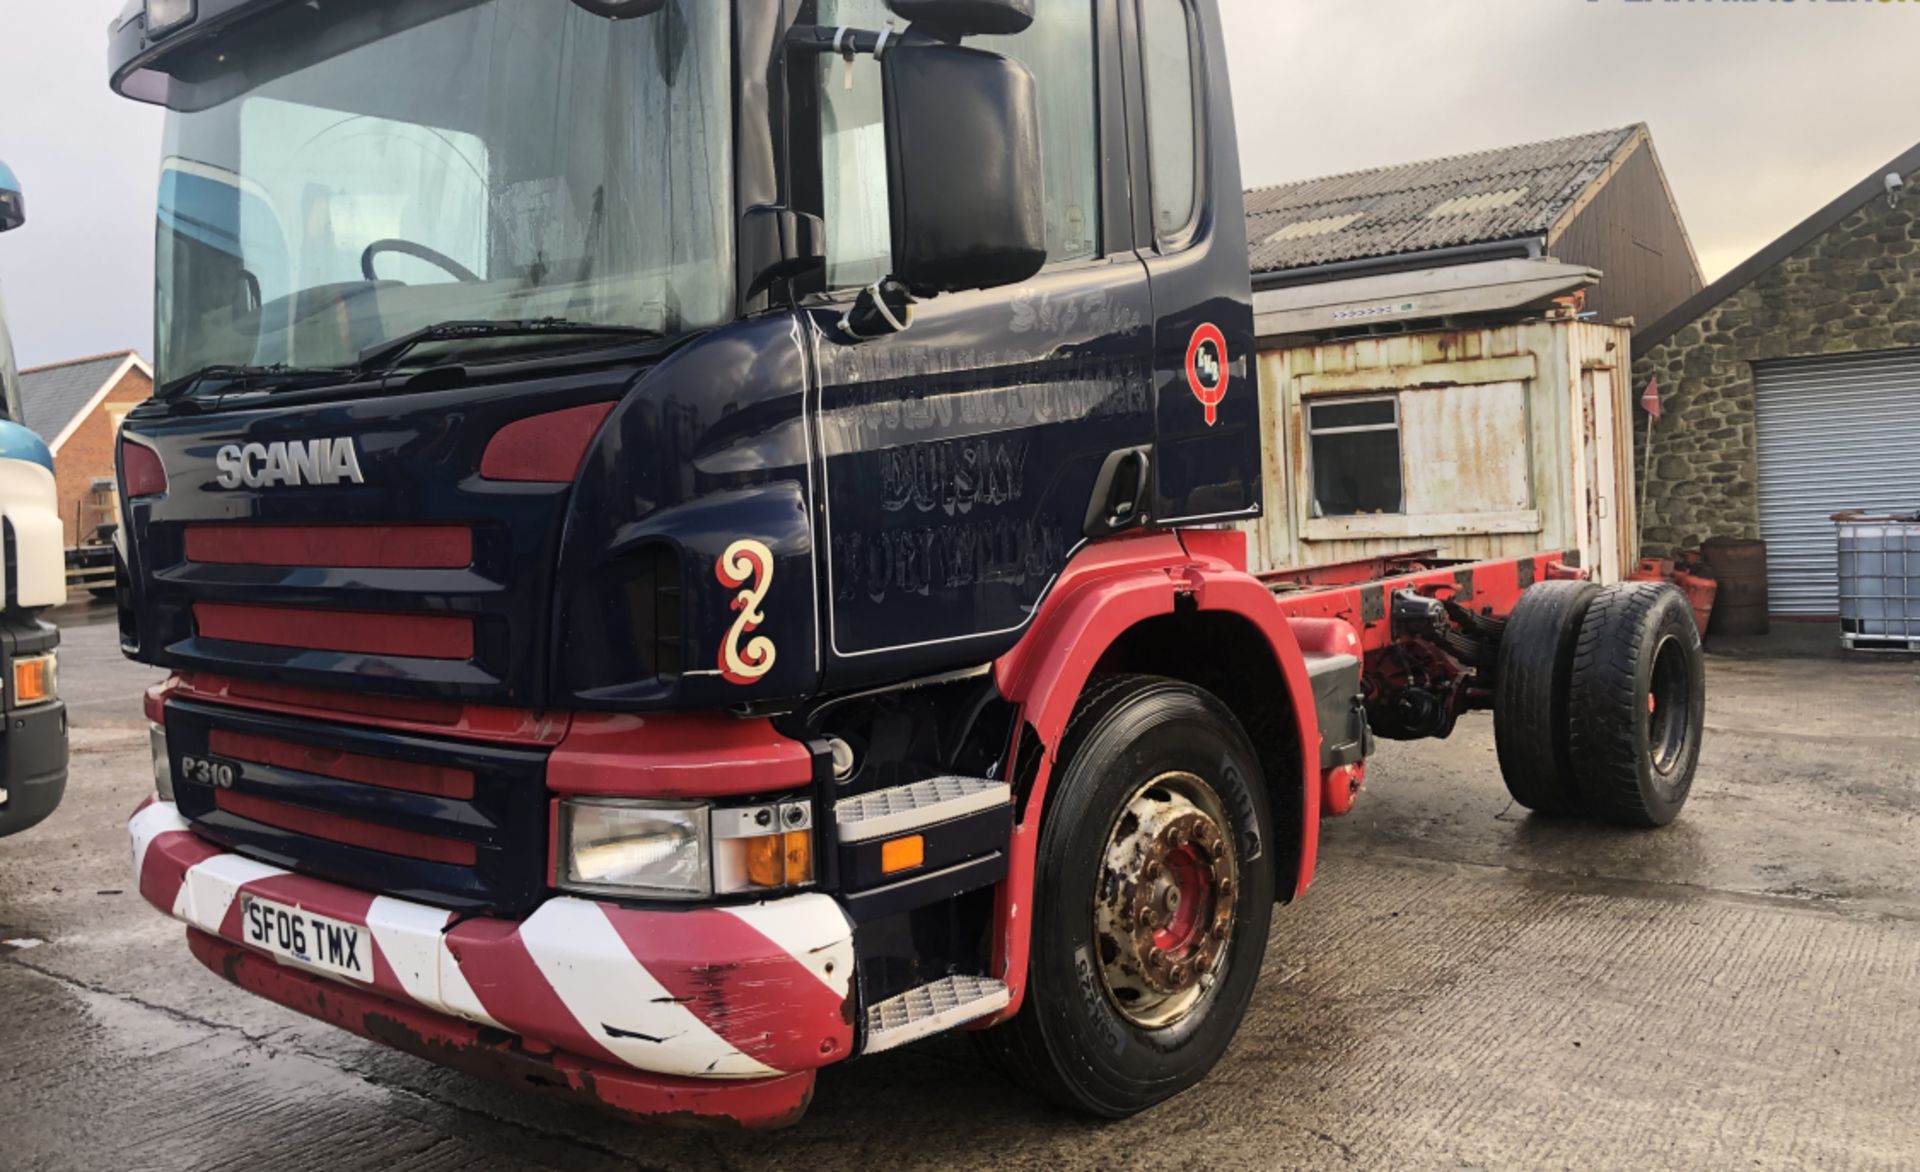 SCANIA P310 CAB AND CHASSIS - Image 2 of 13